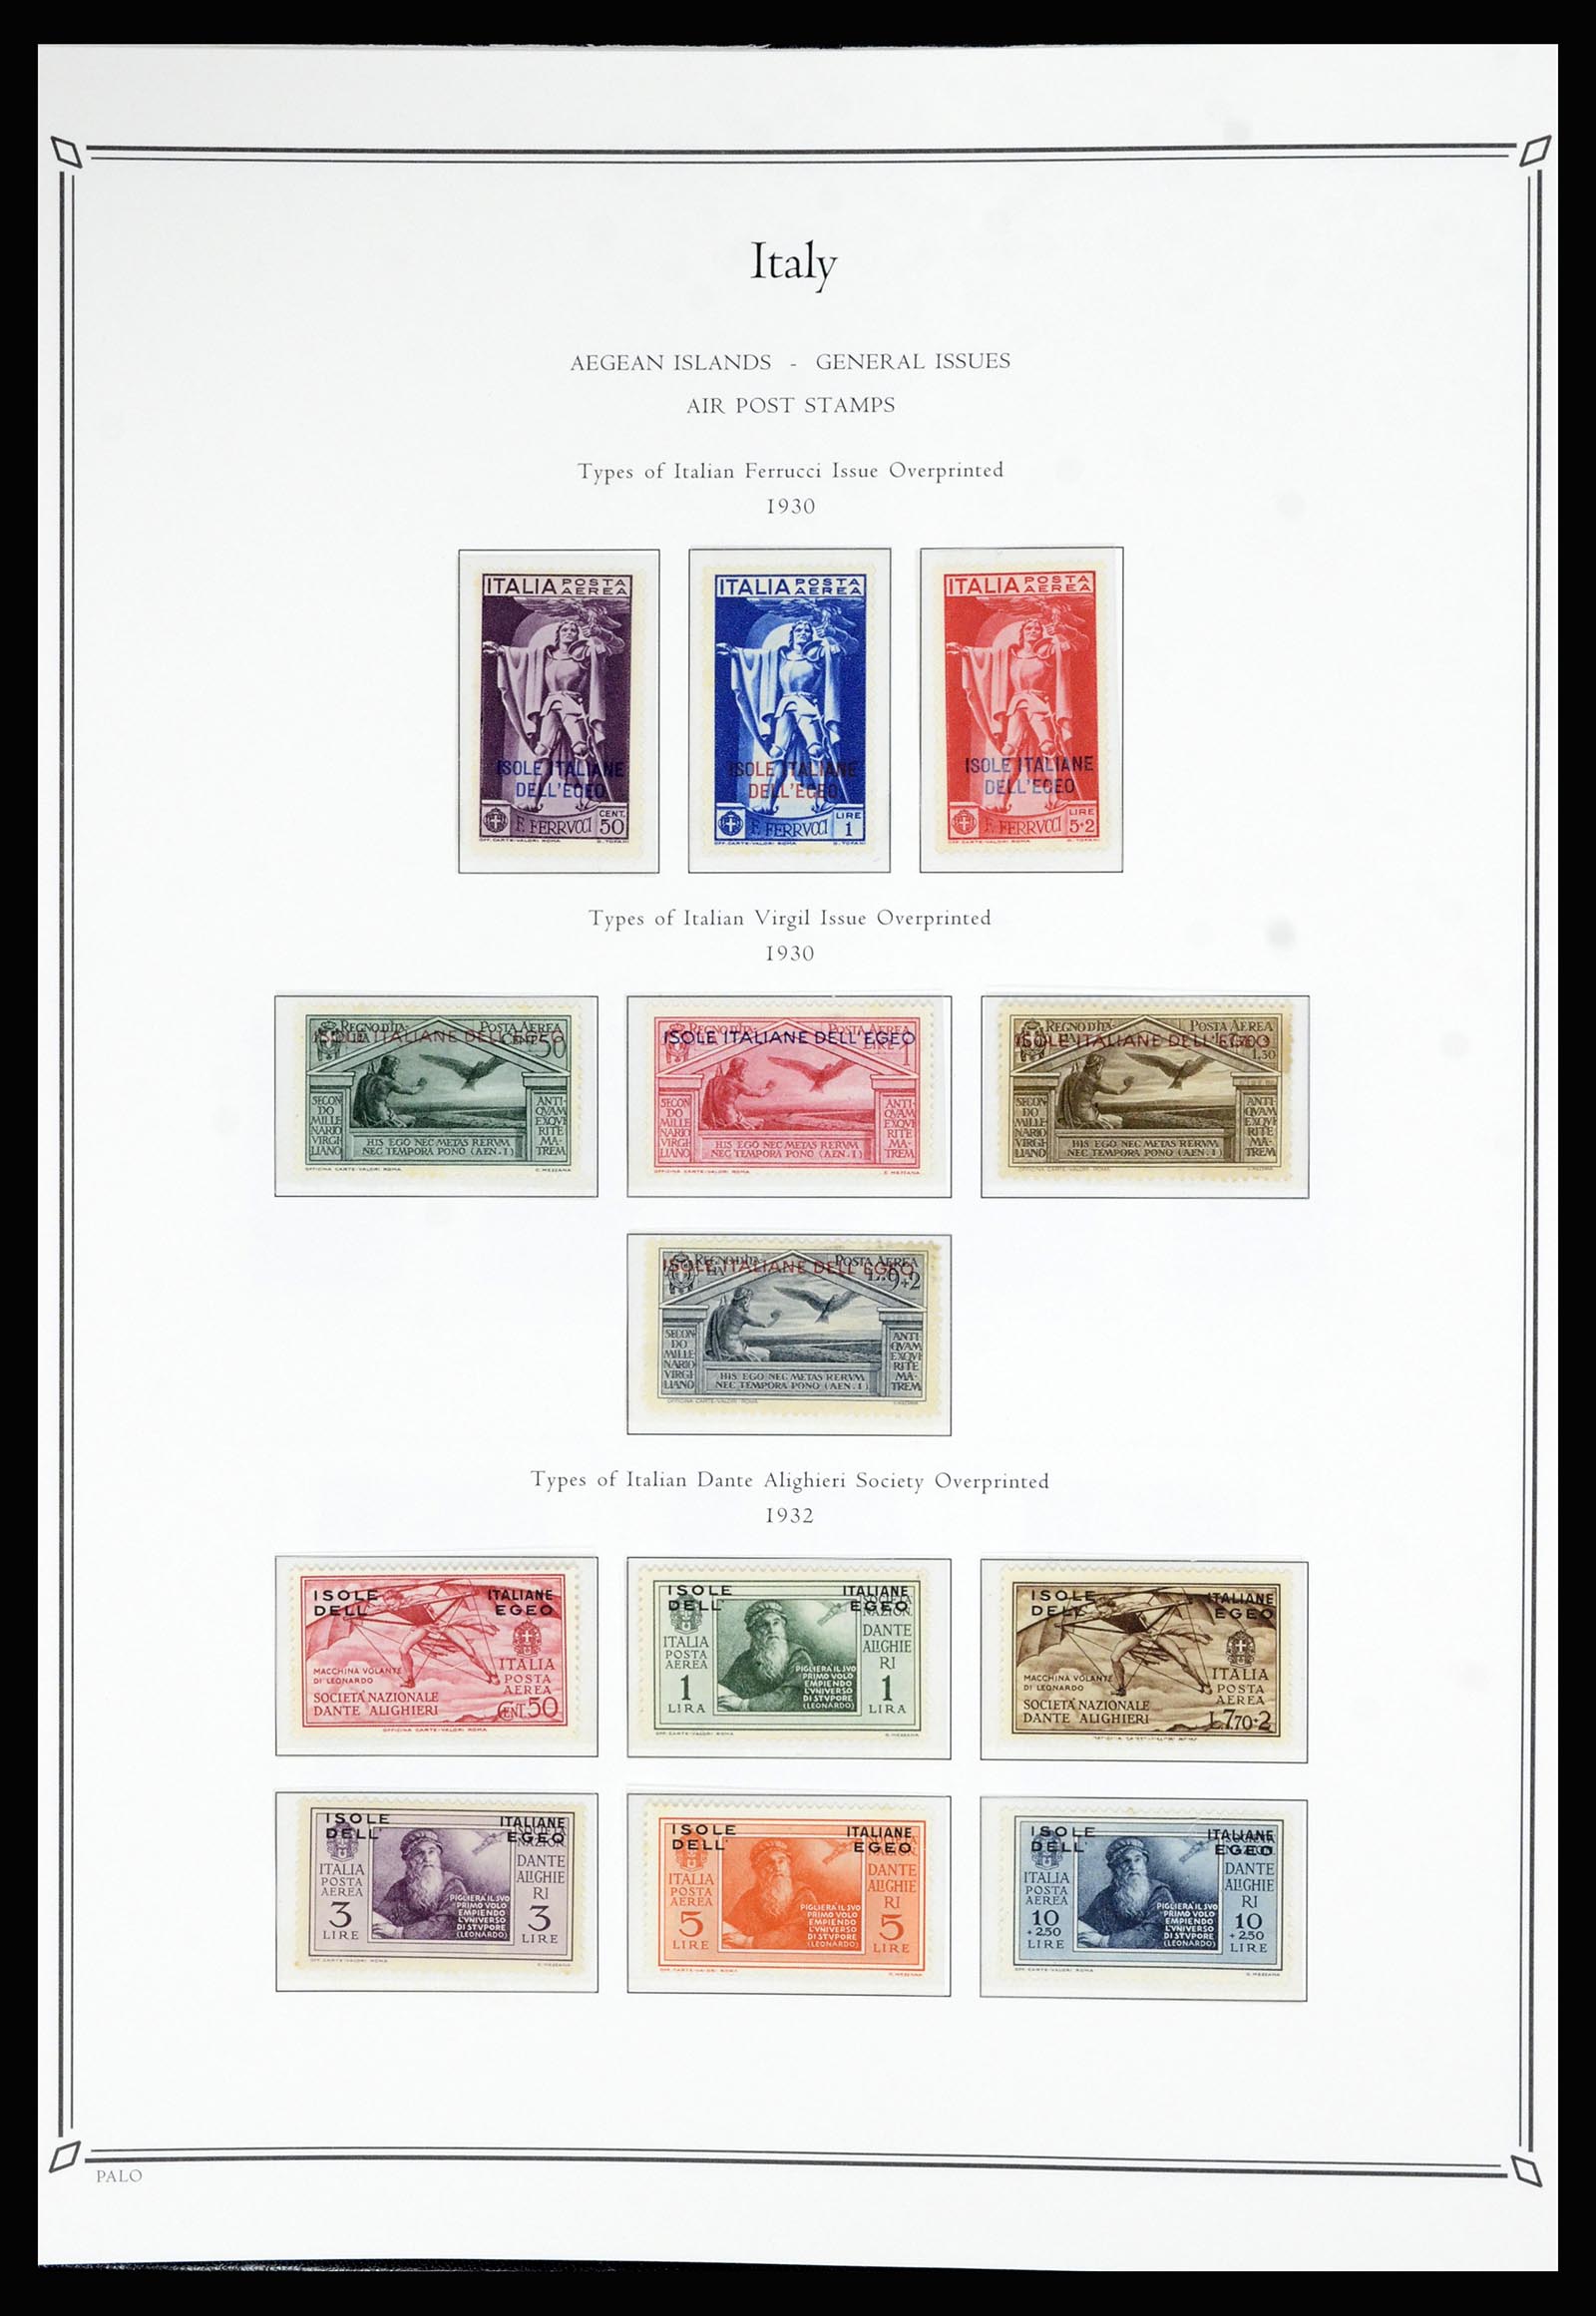 36786 209 - Stamp collection 36786 Italy and Aegean Islands 1860-1990.